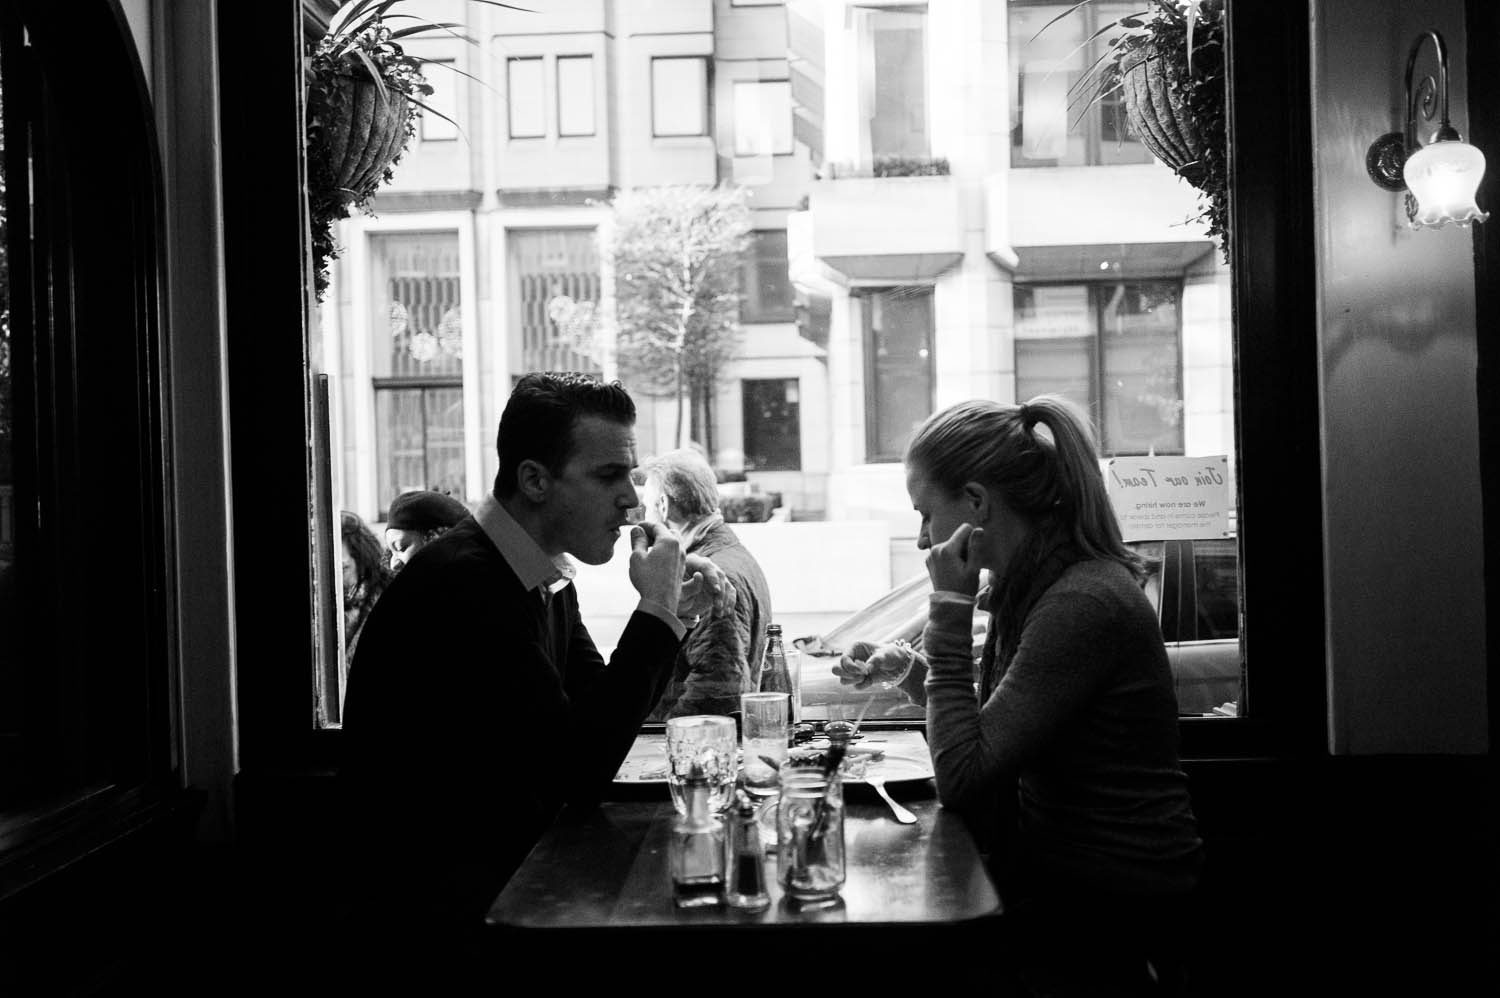 A couple dining at a pub in London